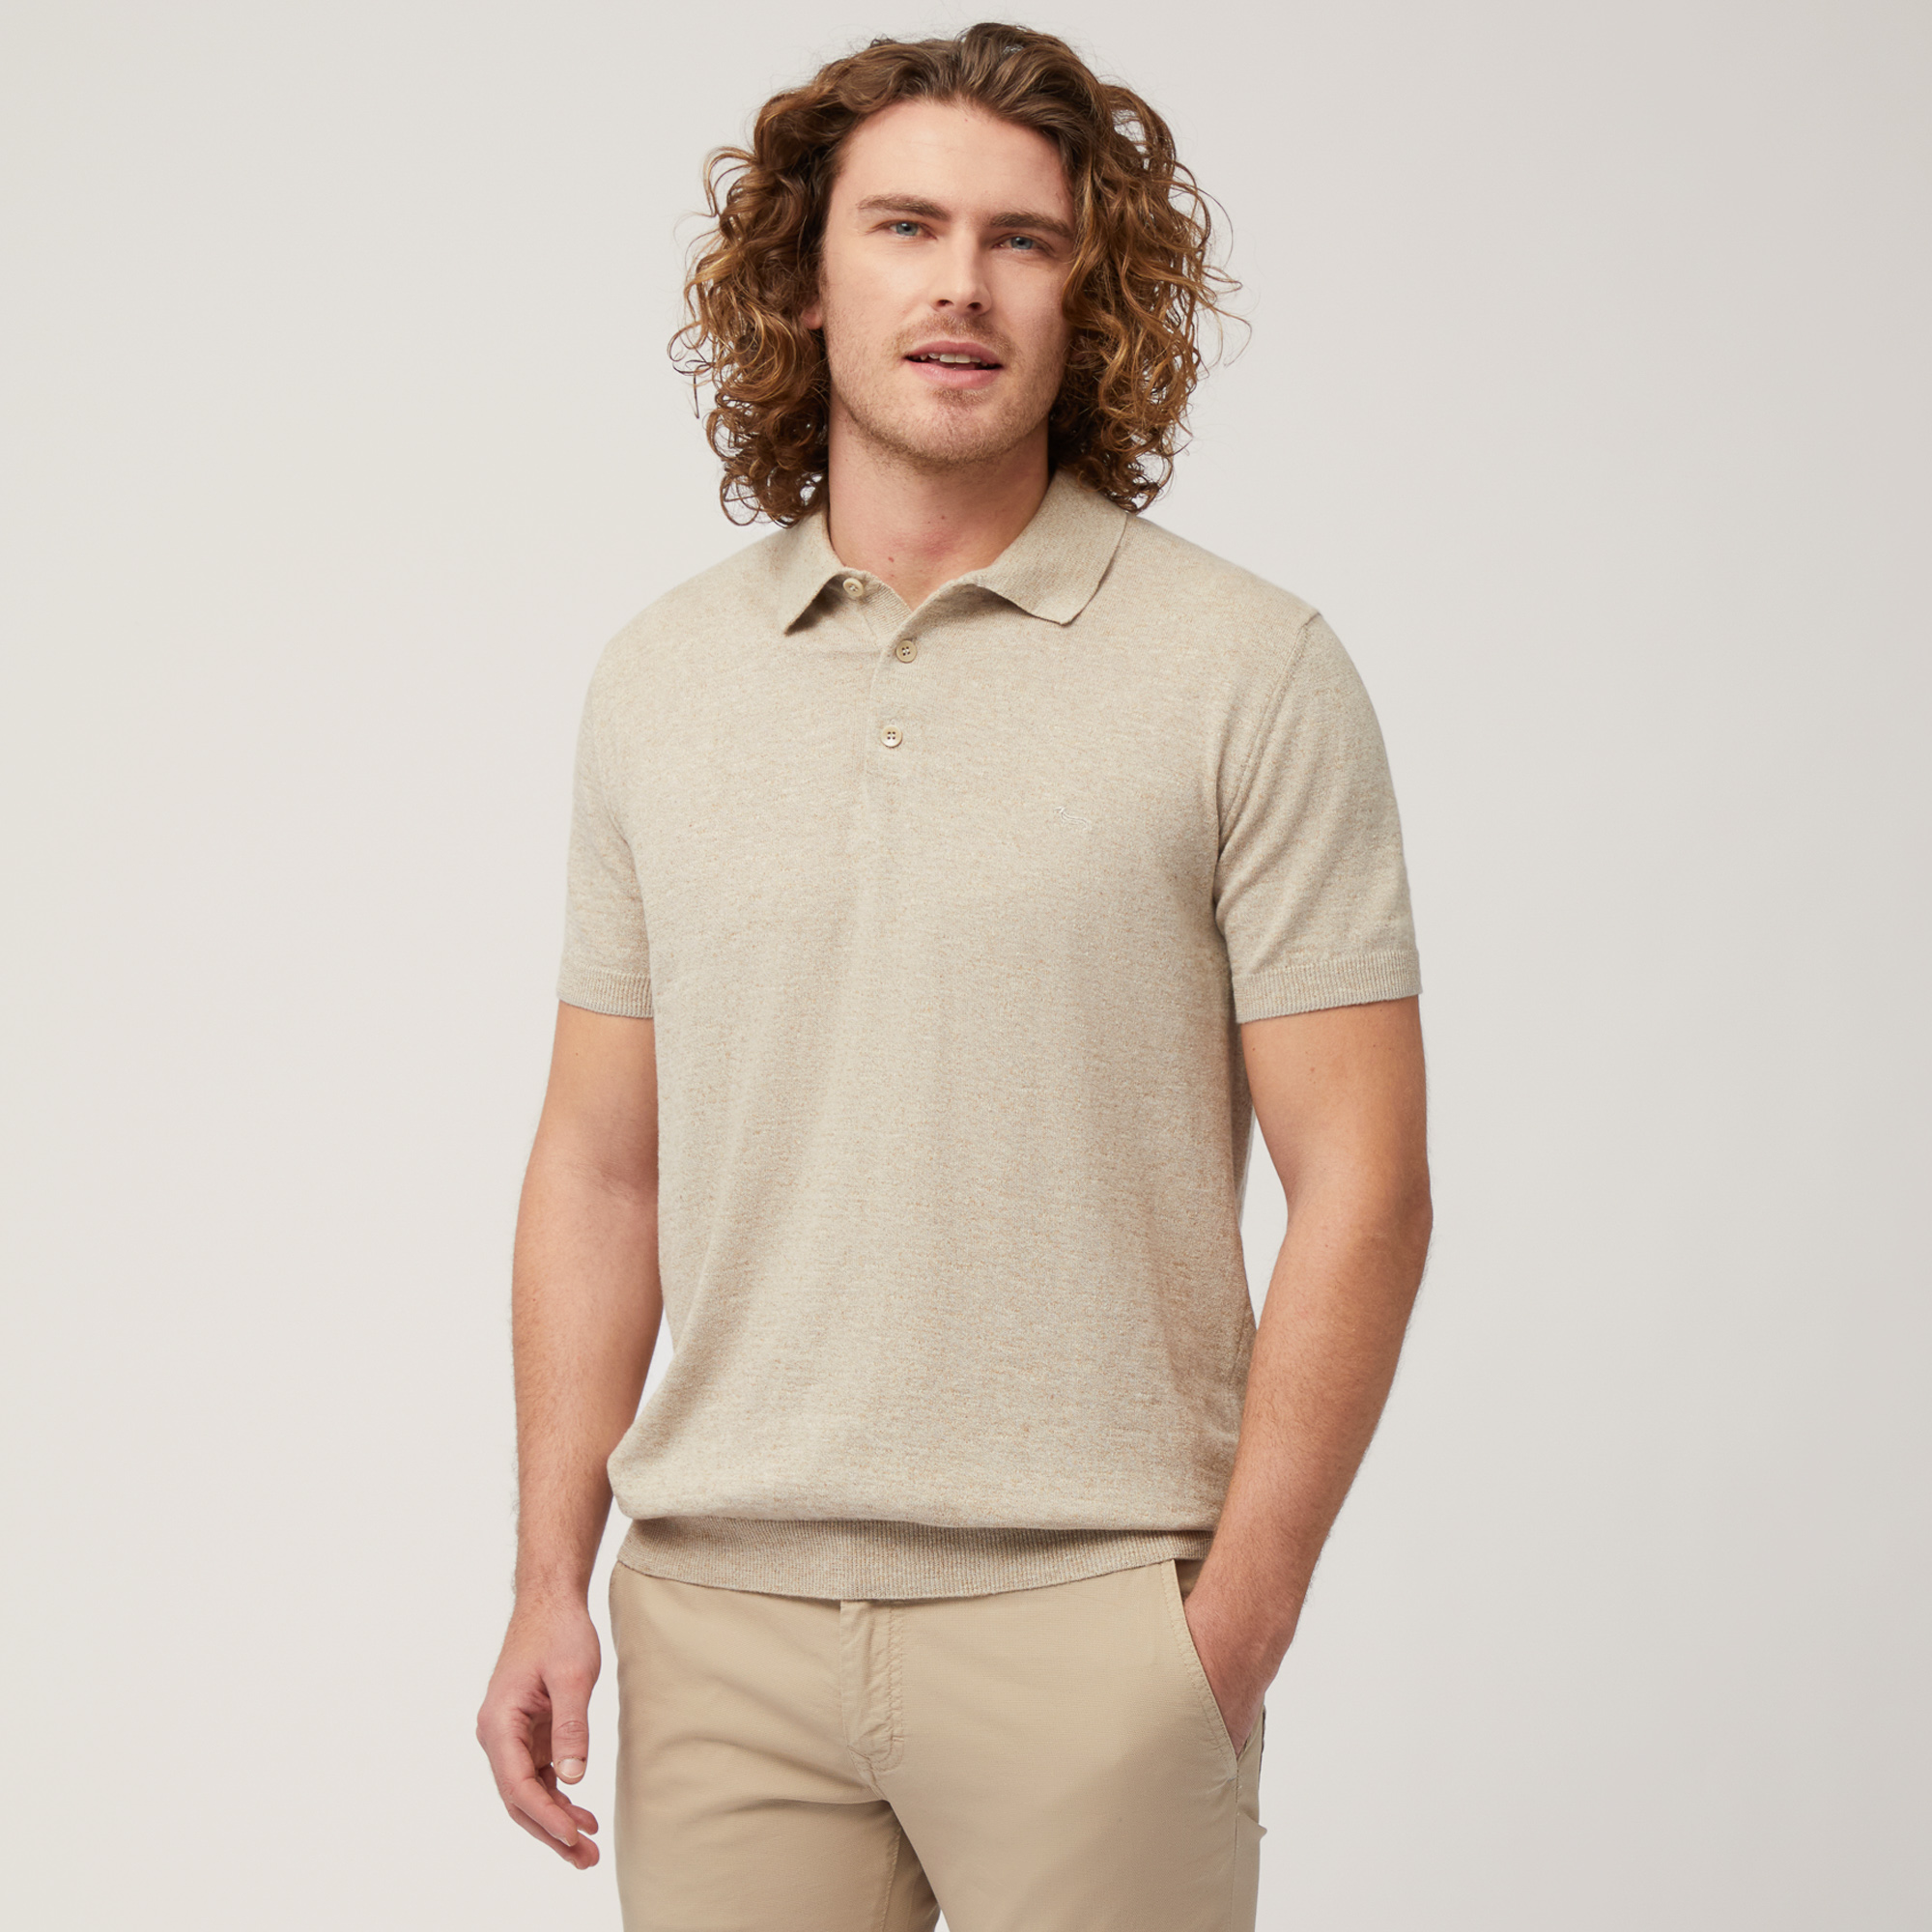 Cotton and Linen Tweed Polo, Beige, large